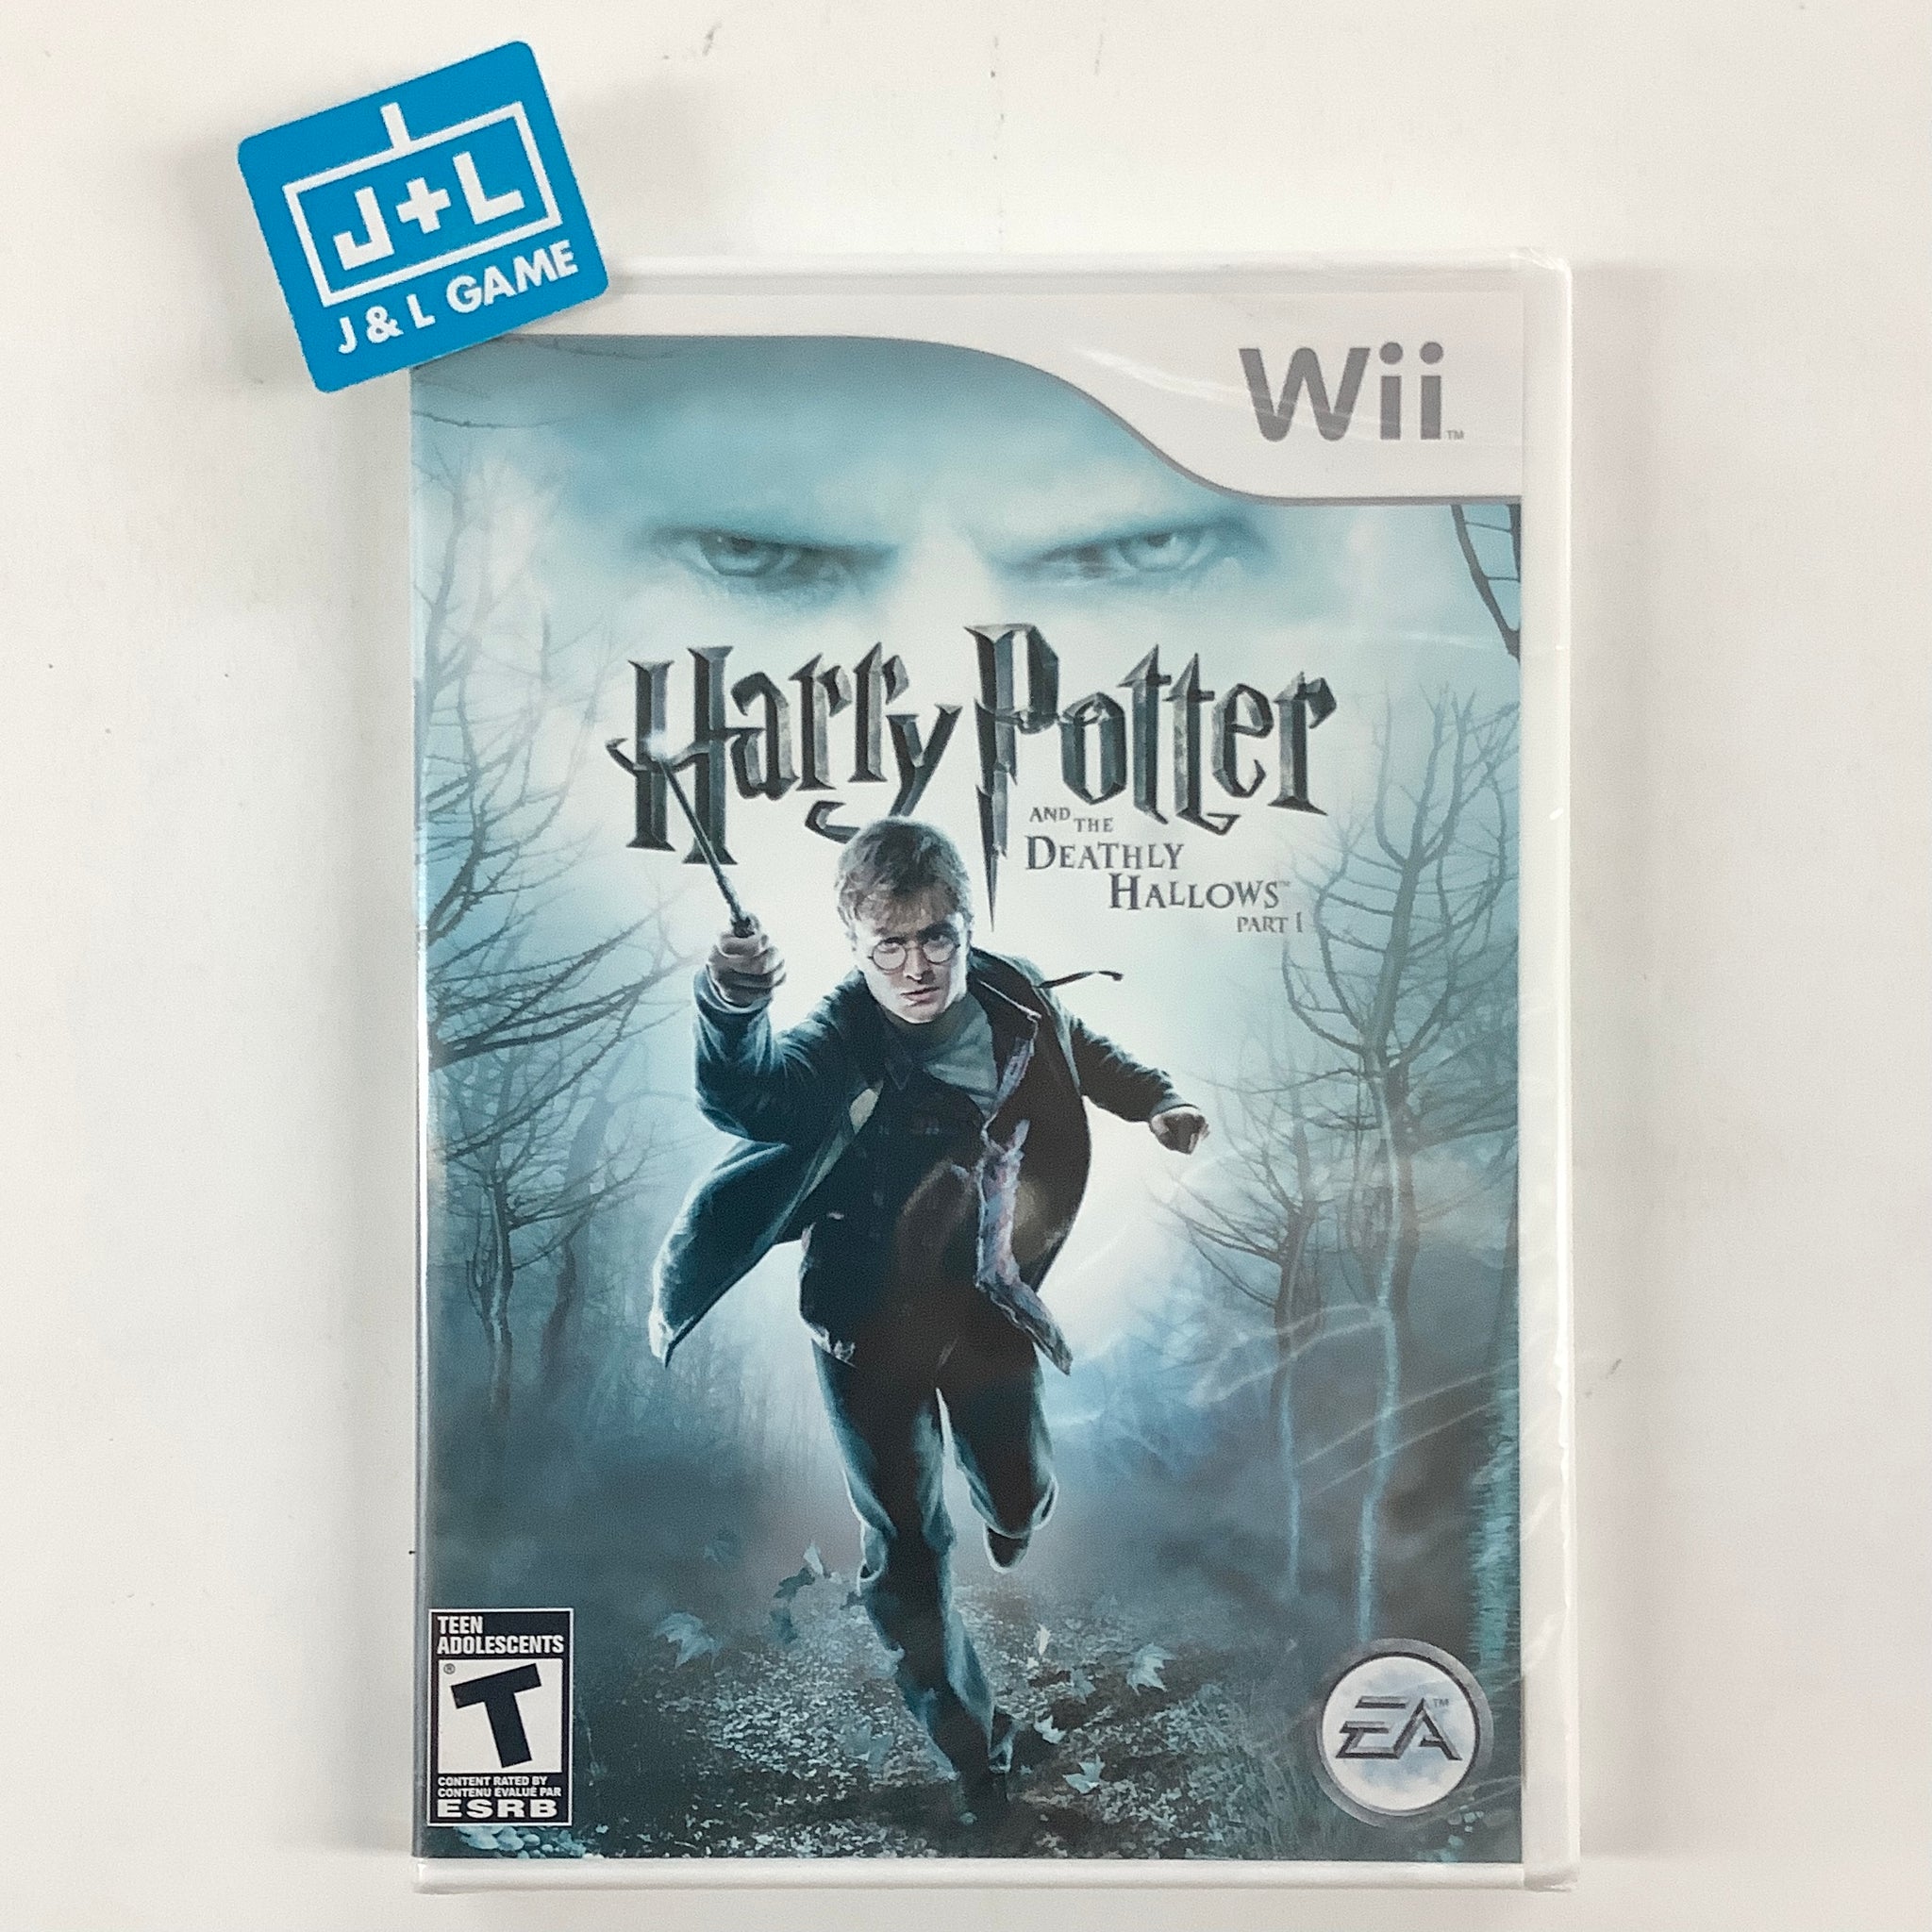 Harry Potter and the Deathly Hallows - Part 1: The Videogame